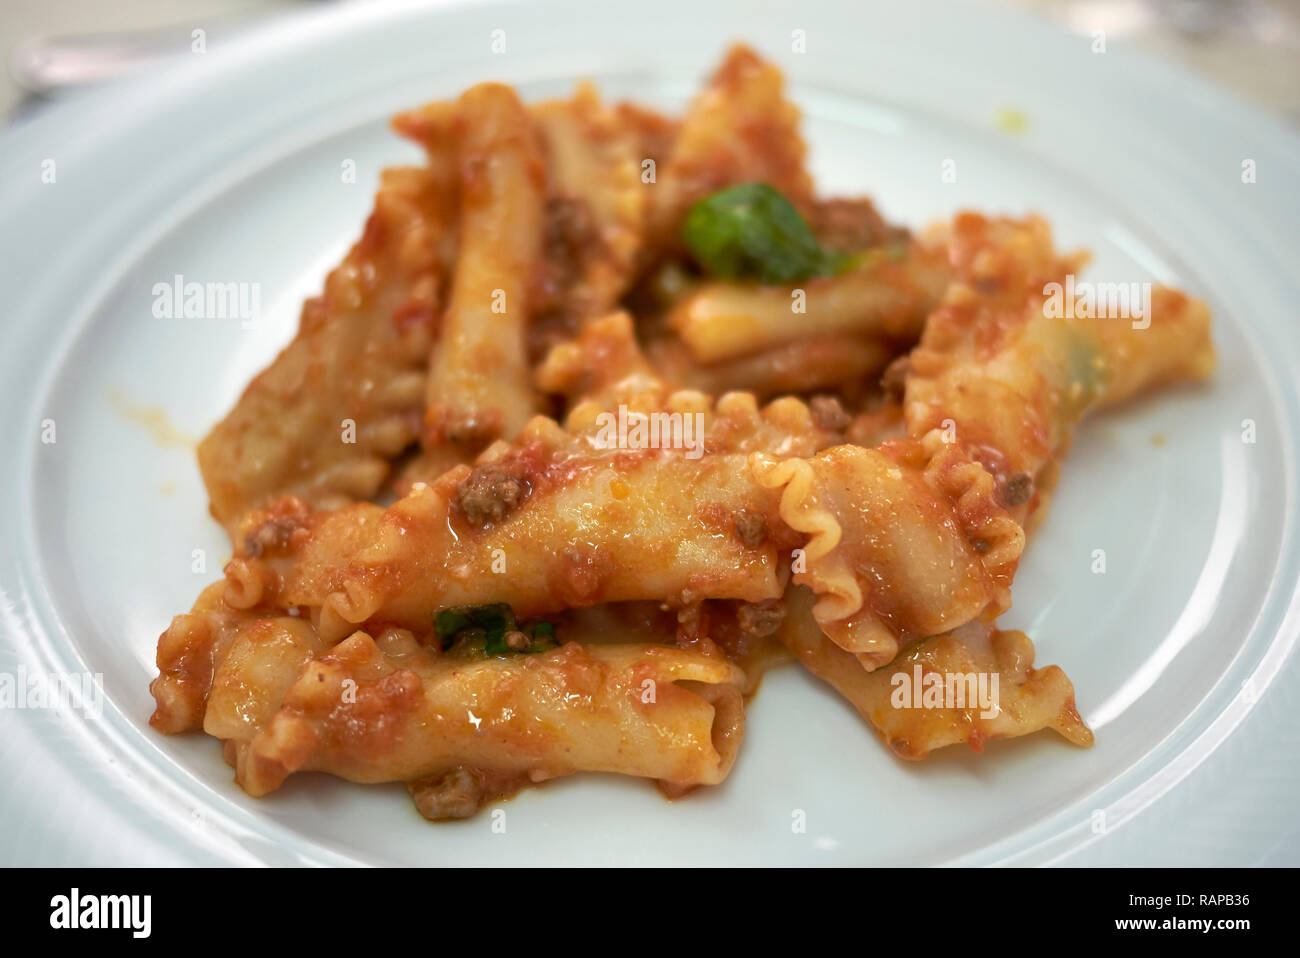 Home made pasta with bolognese sauce made with podolica meat Stock Photo